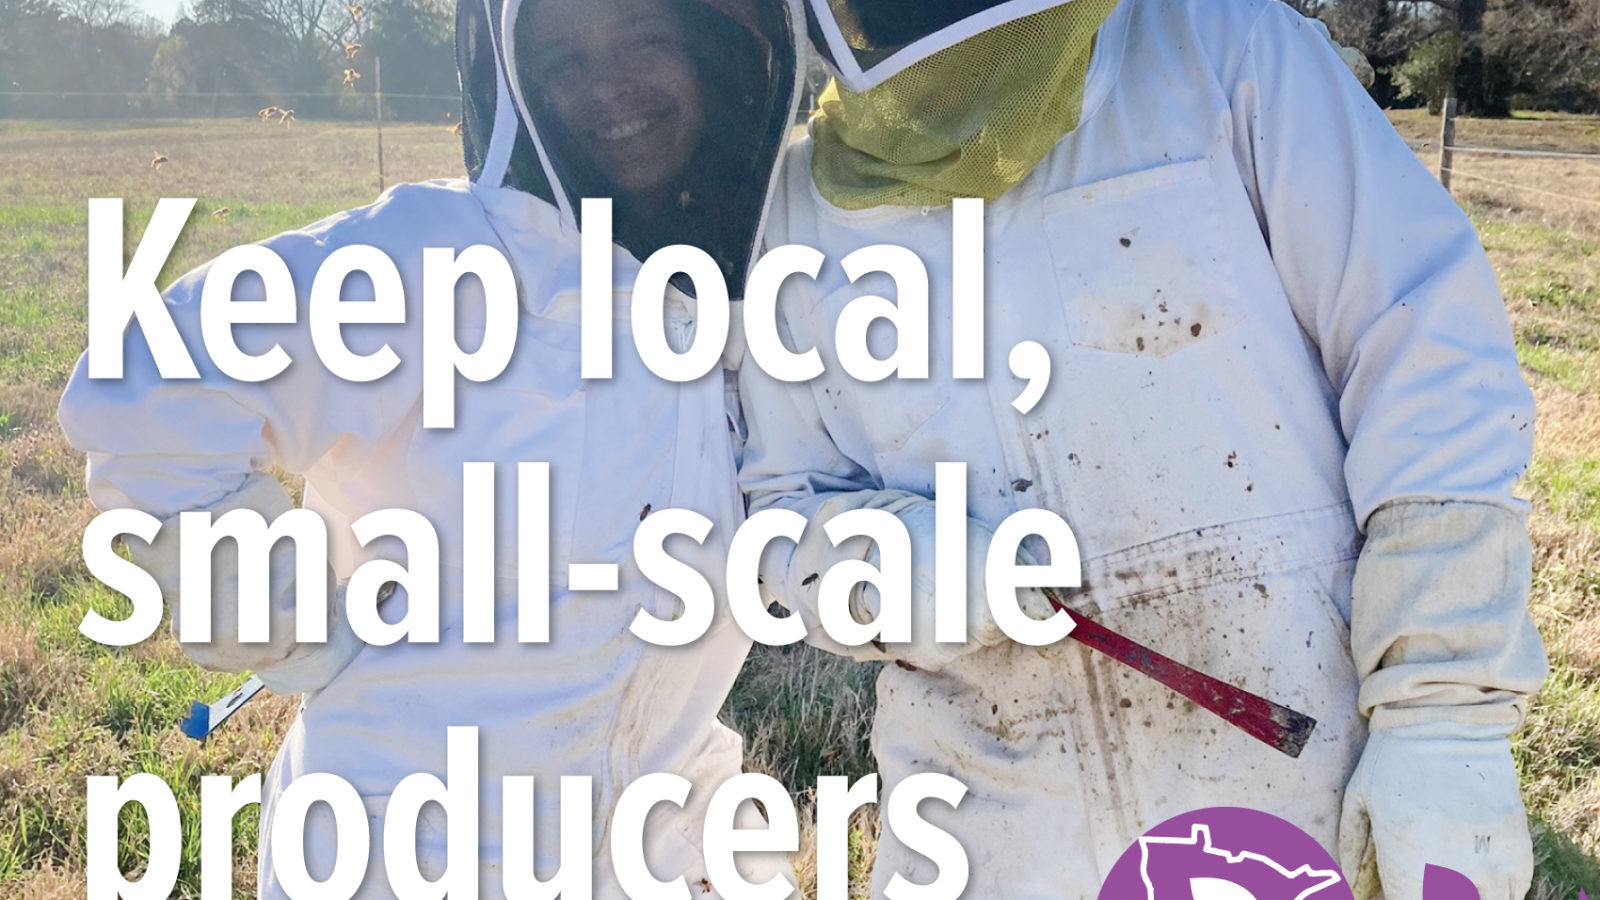 Two people in beekeeping suits posing for a photo with text overlay reading "Keep local, small-scale producers thriving"